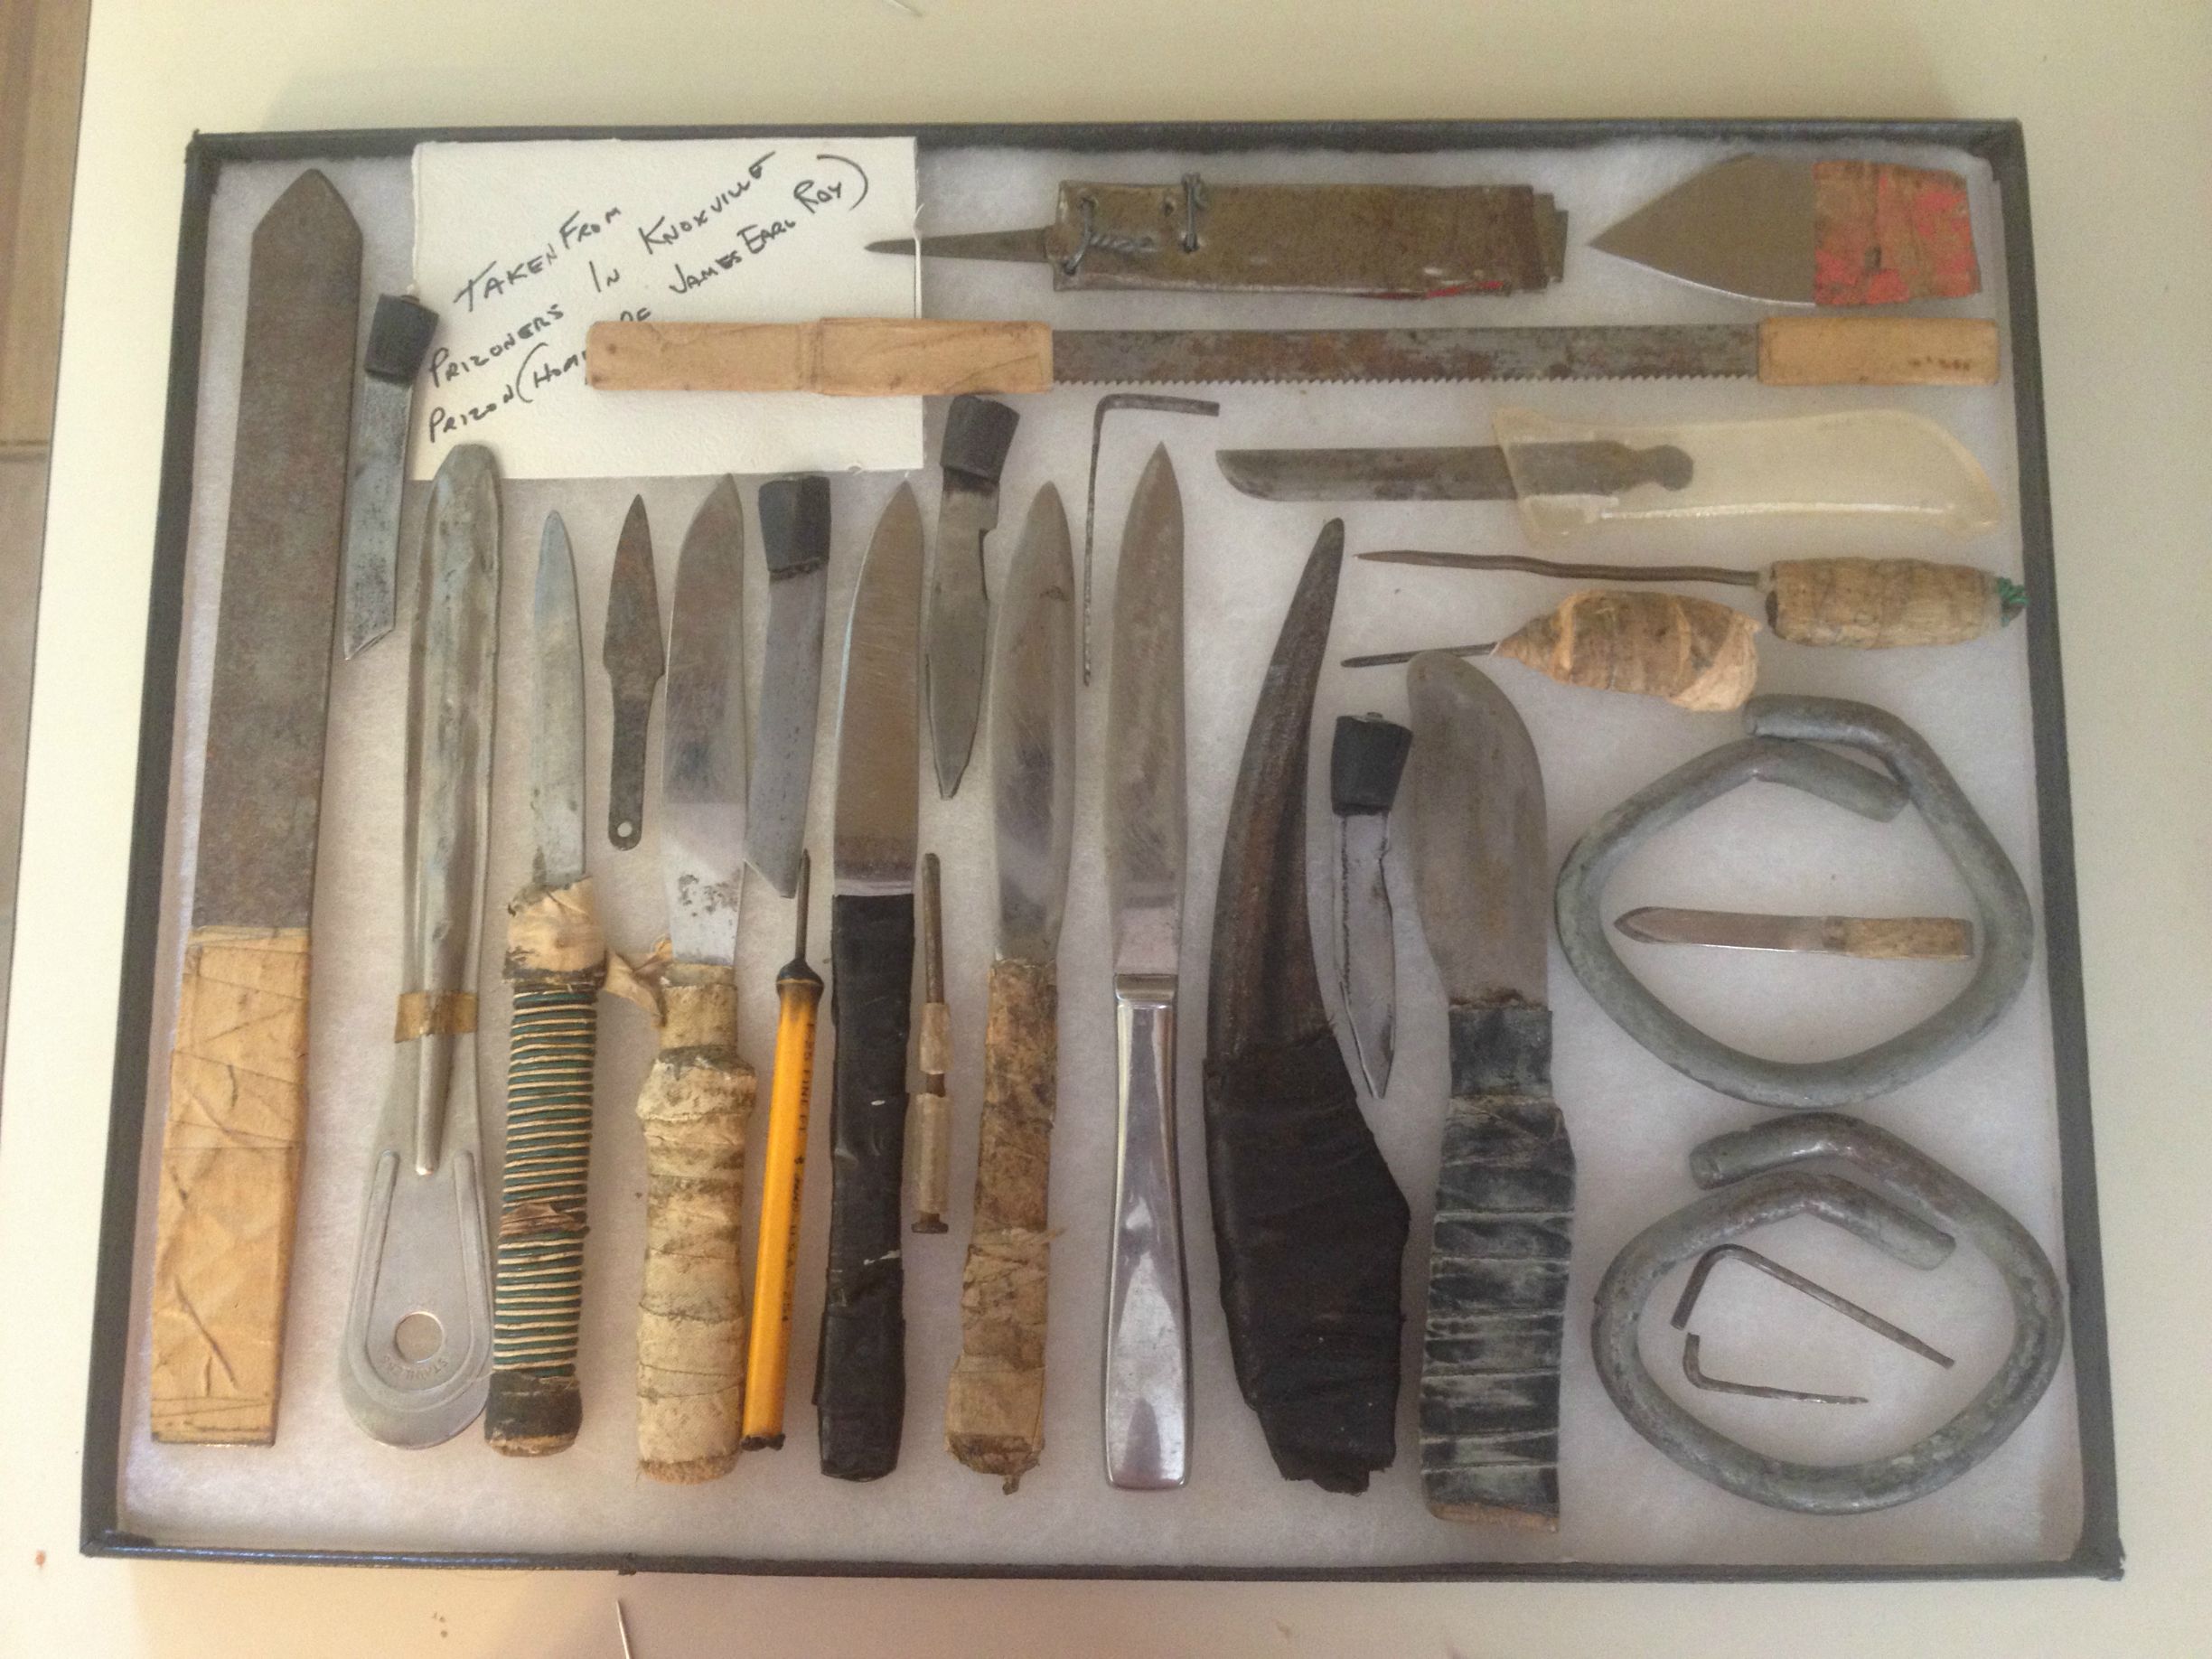 Confiscated prison shanksThe Creative Ingenuity Of Prison Inmates